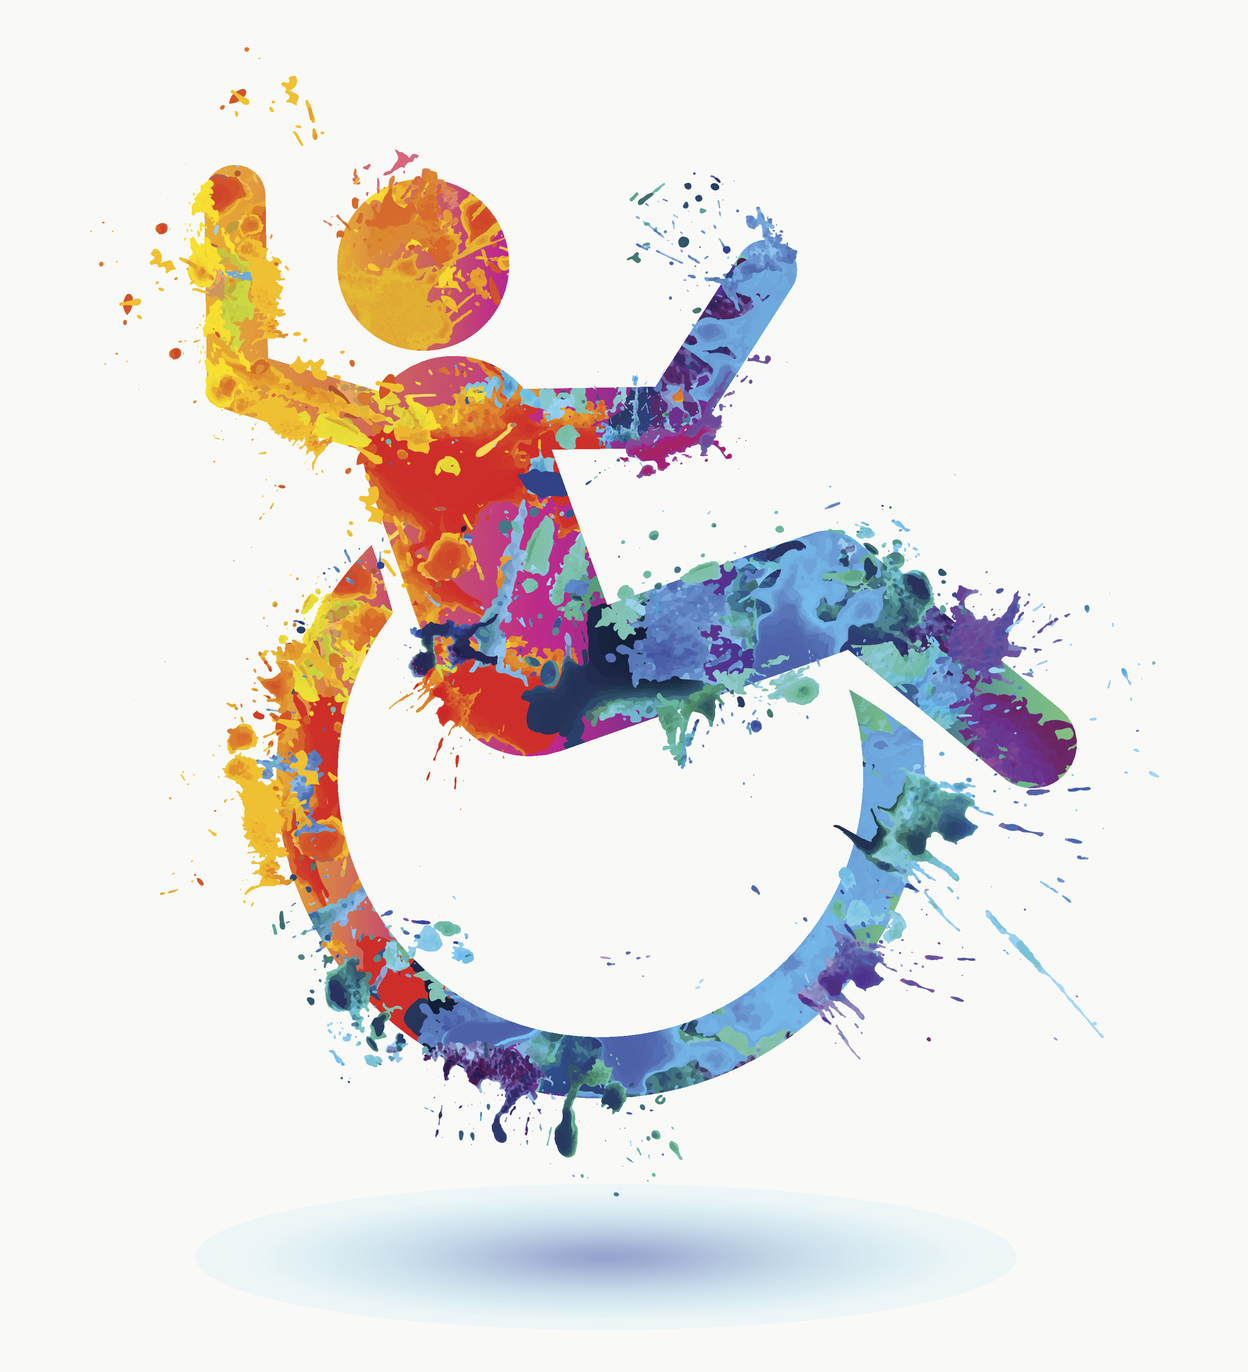 disability illustration of person in wheelchair